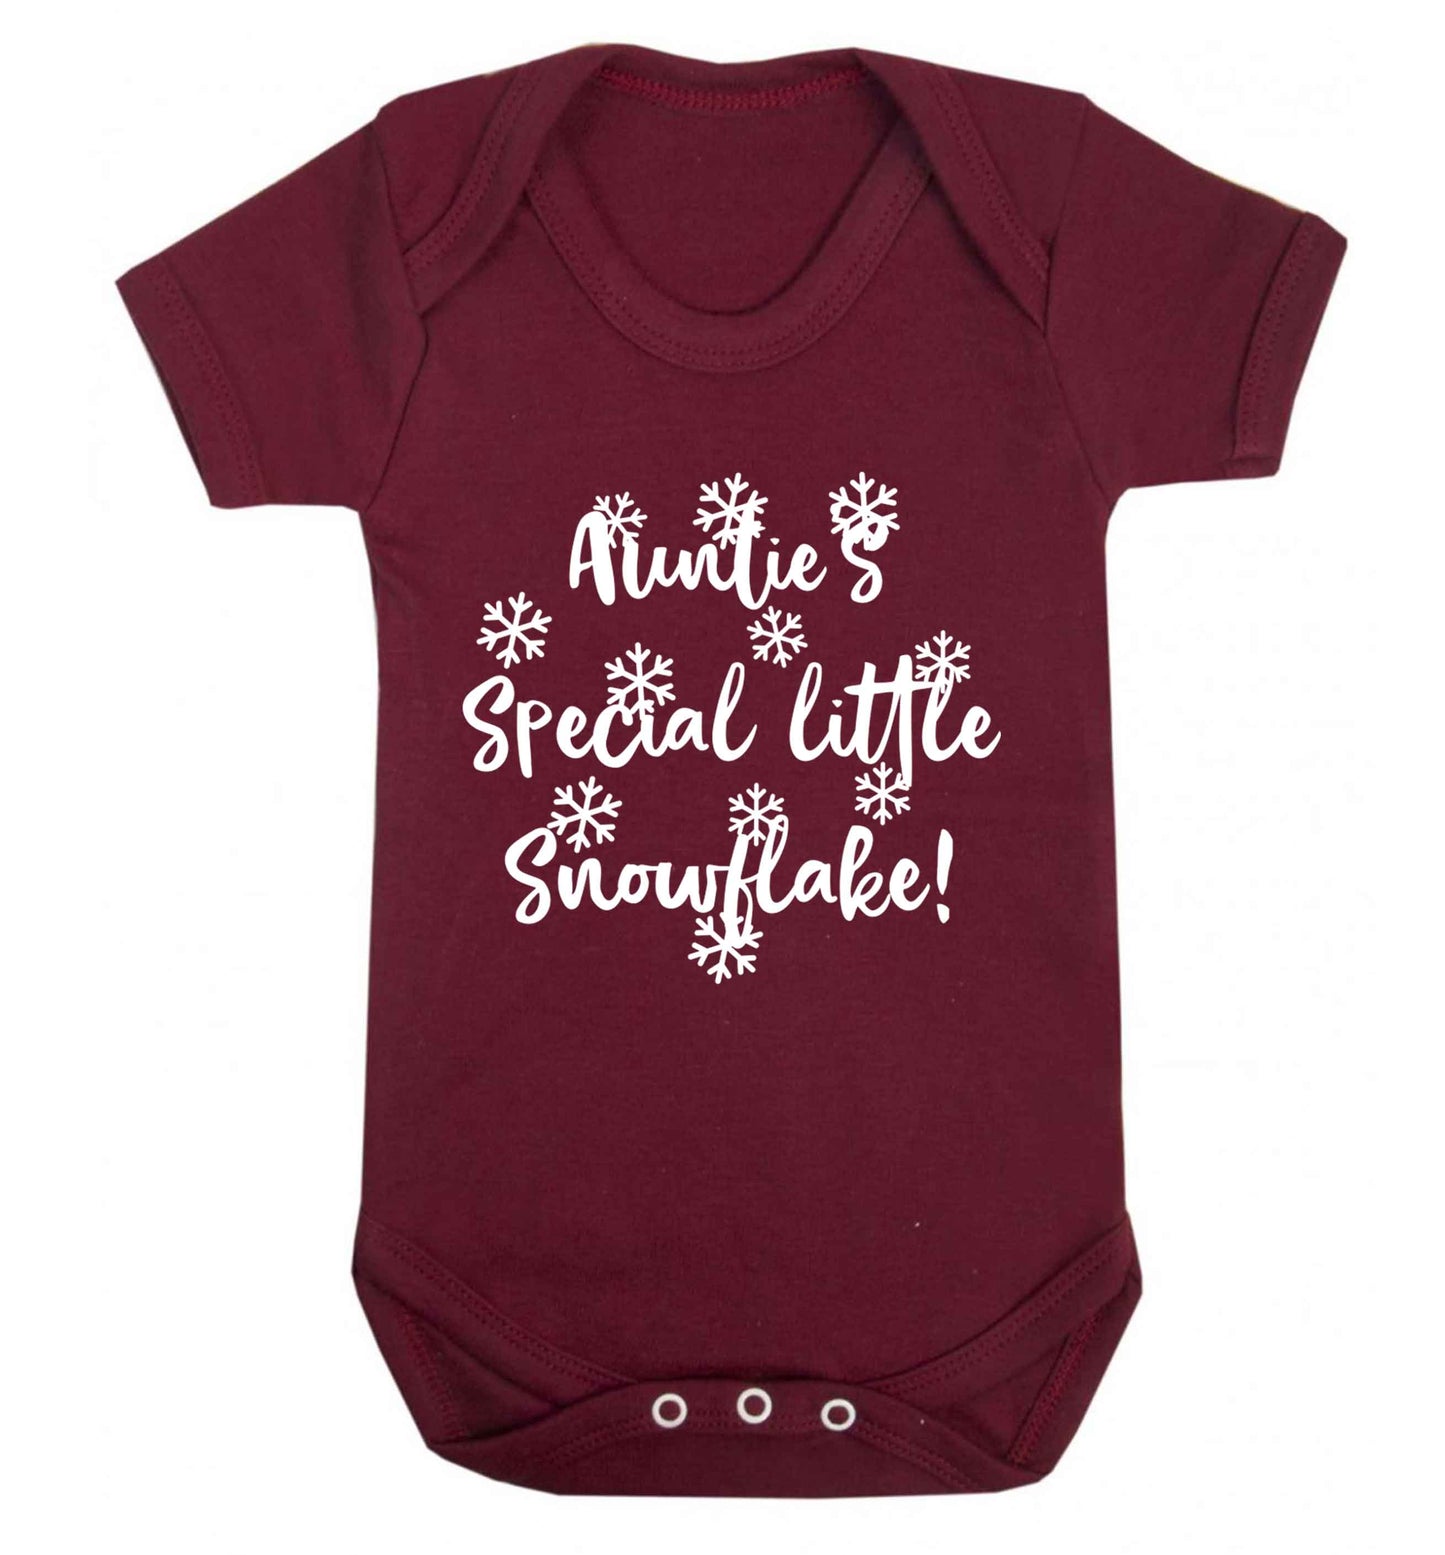 Auntie's special little snowflake Baby Vest maroon 18-24 months